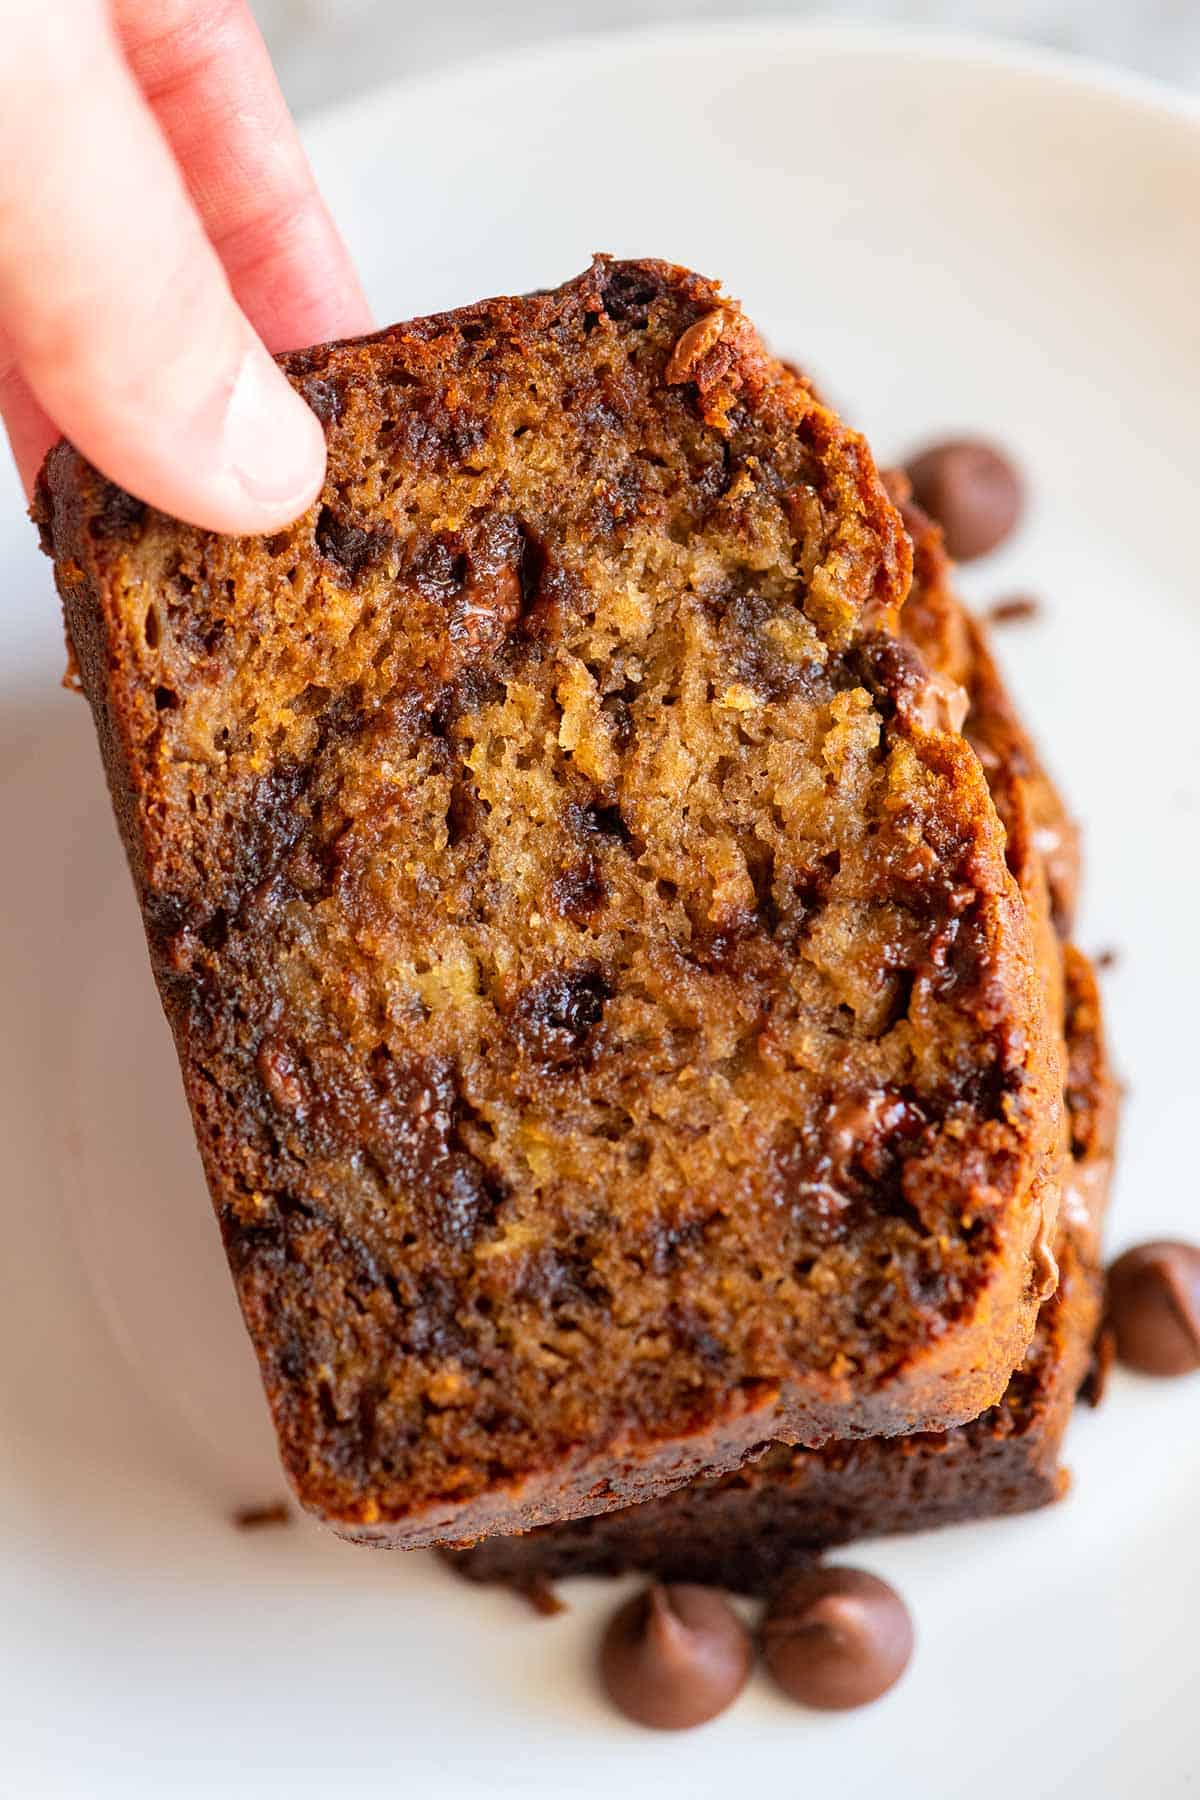 My favorite chocolate chip banana bread recipe! When you see how easy it is to make this chocolate chip banana bread, you'll want to make it all the time.